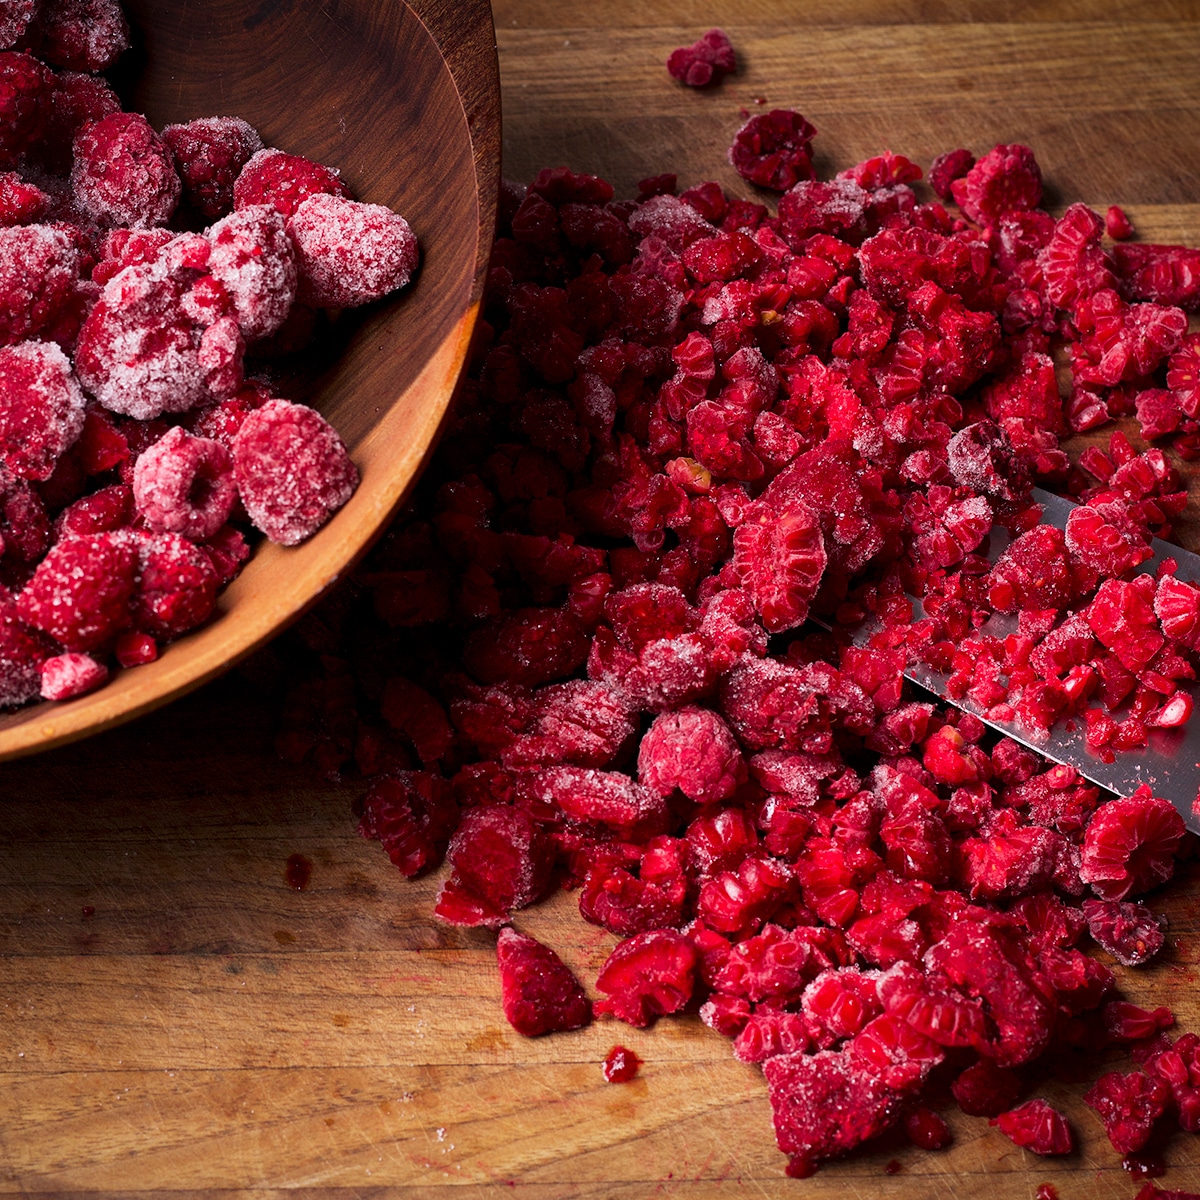 Chopping frozen raspberries into small pieces on a wood cutting board.